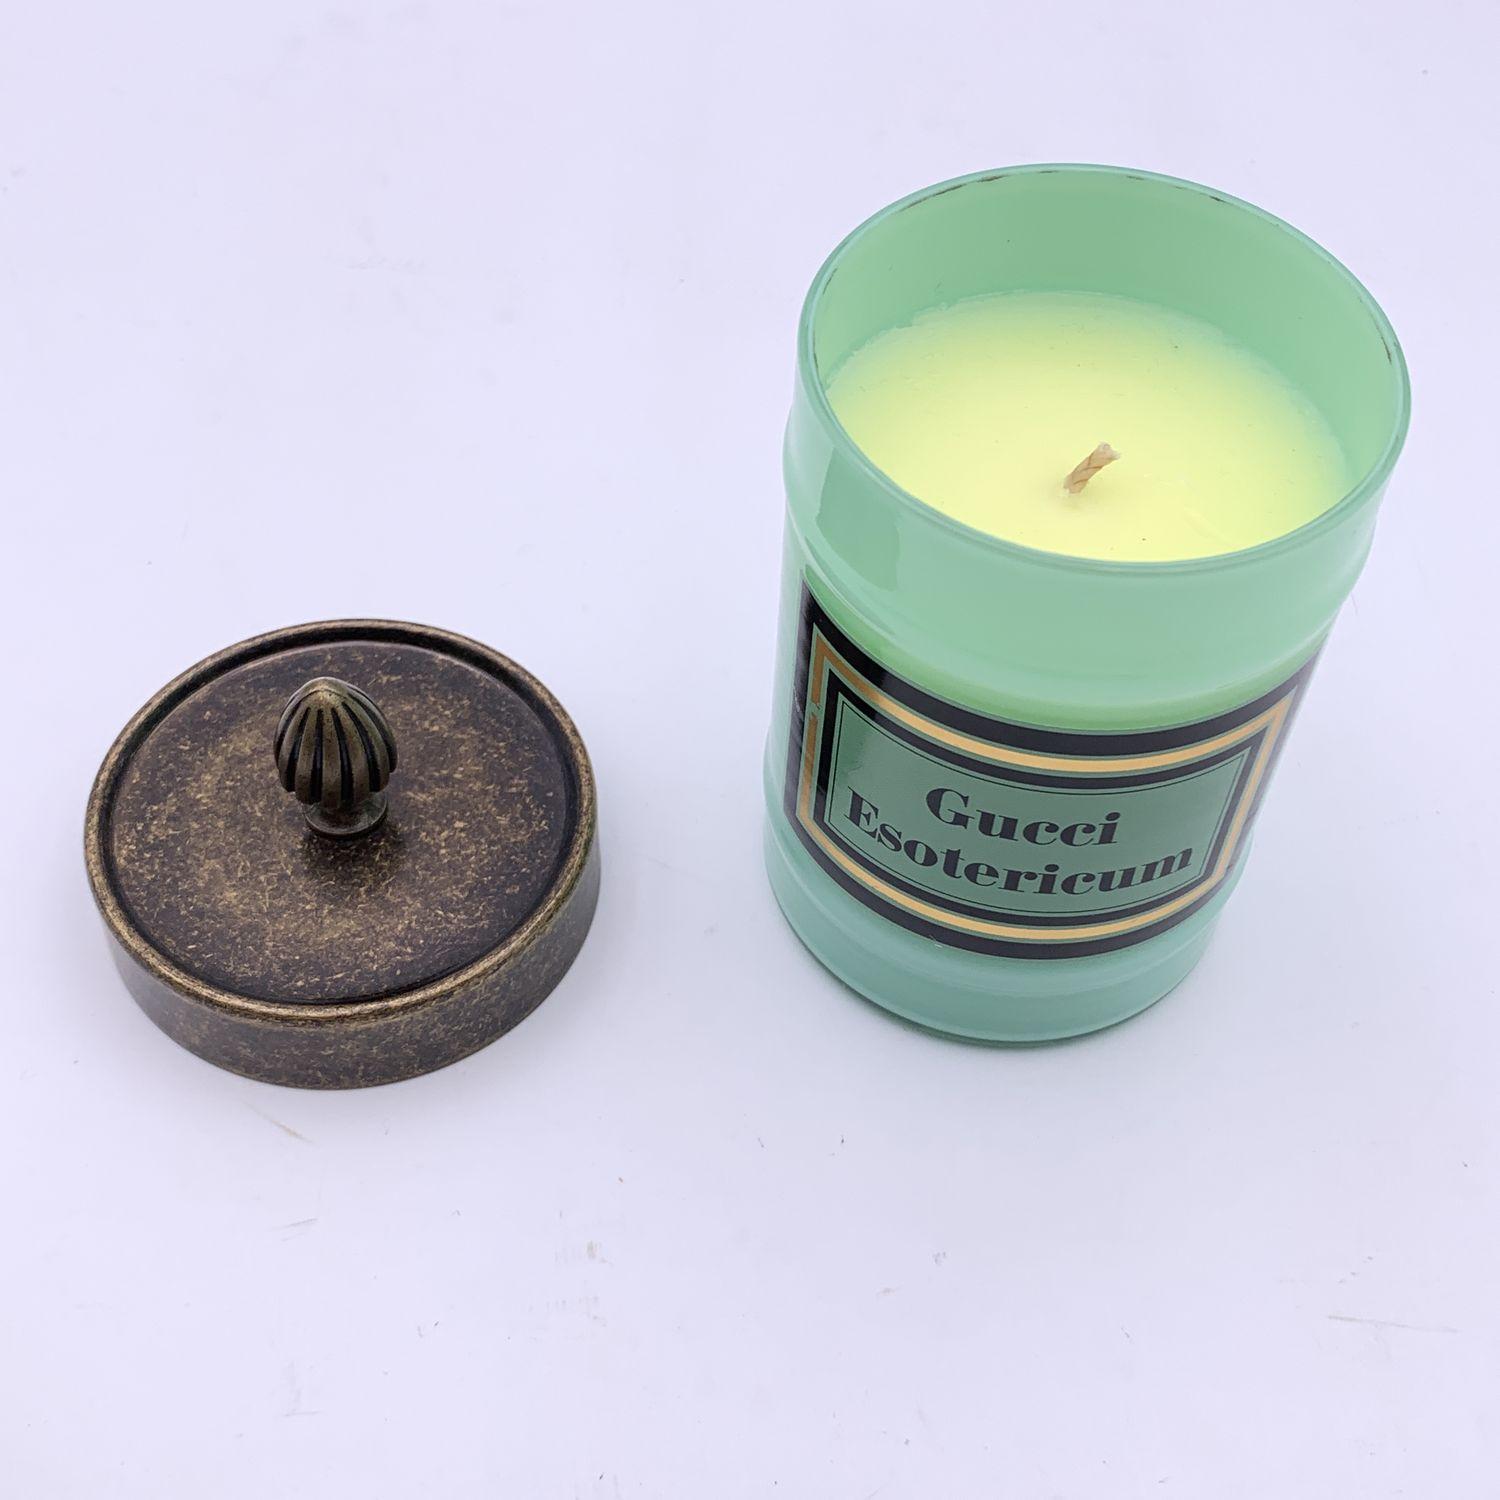 Gucci Esotericum Scented Candle Aqua Green Murano Glass Jar In Excellent Condition For Sale In Rome, Rome